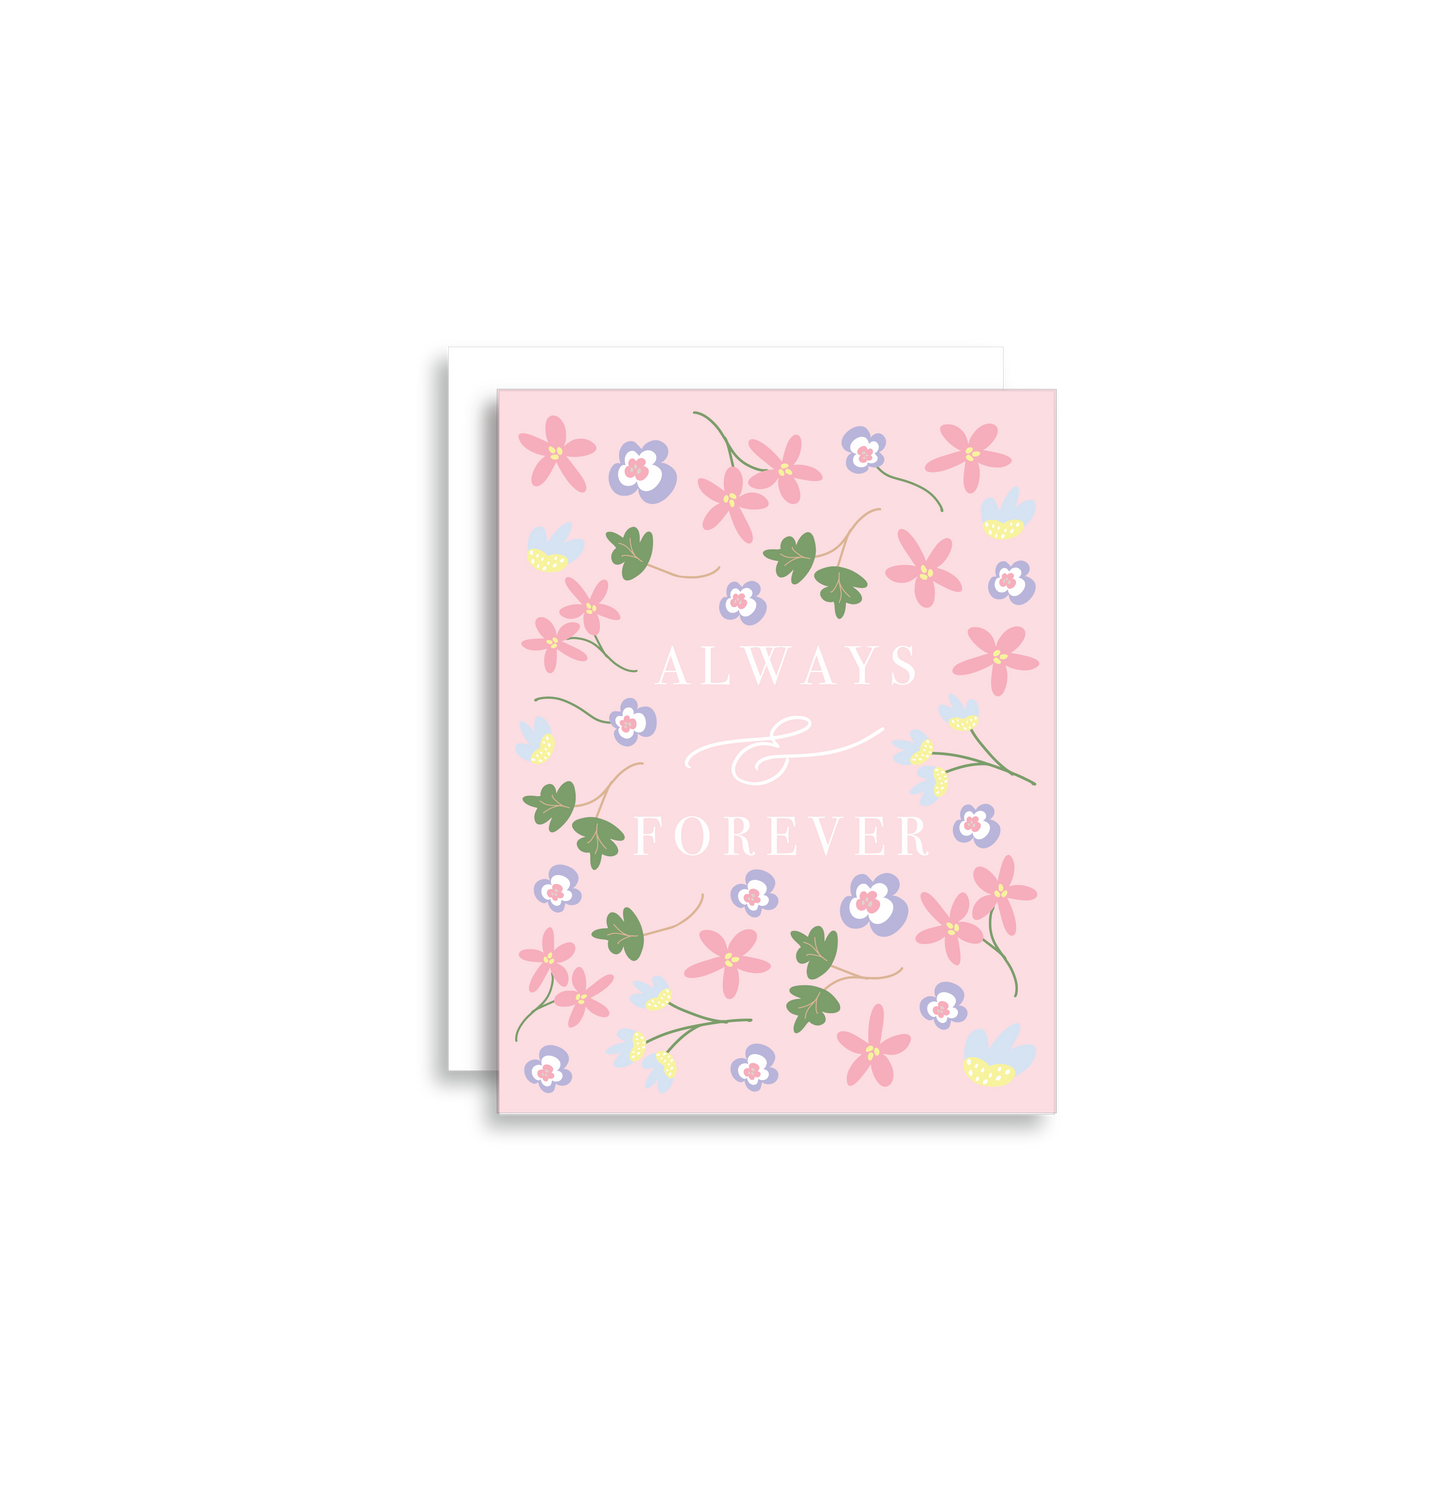 Always & Forever' greeting card, perfectly suited for anniversaries, weddings, or Valentine's Day. Measuring at 4.25" in height by 5.5" in width, each card provides ample space for your personal message inside